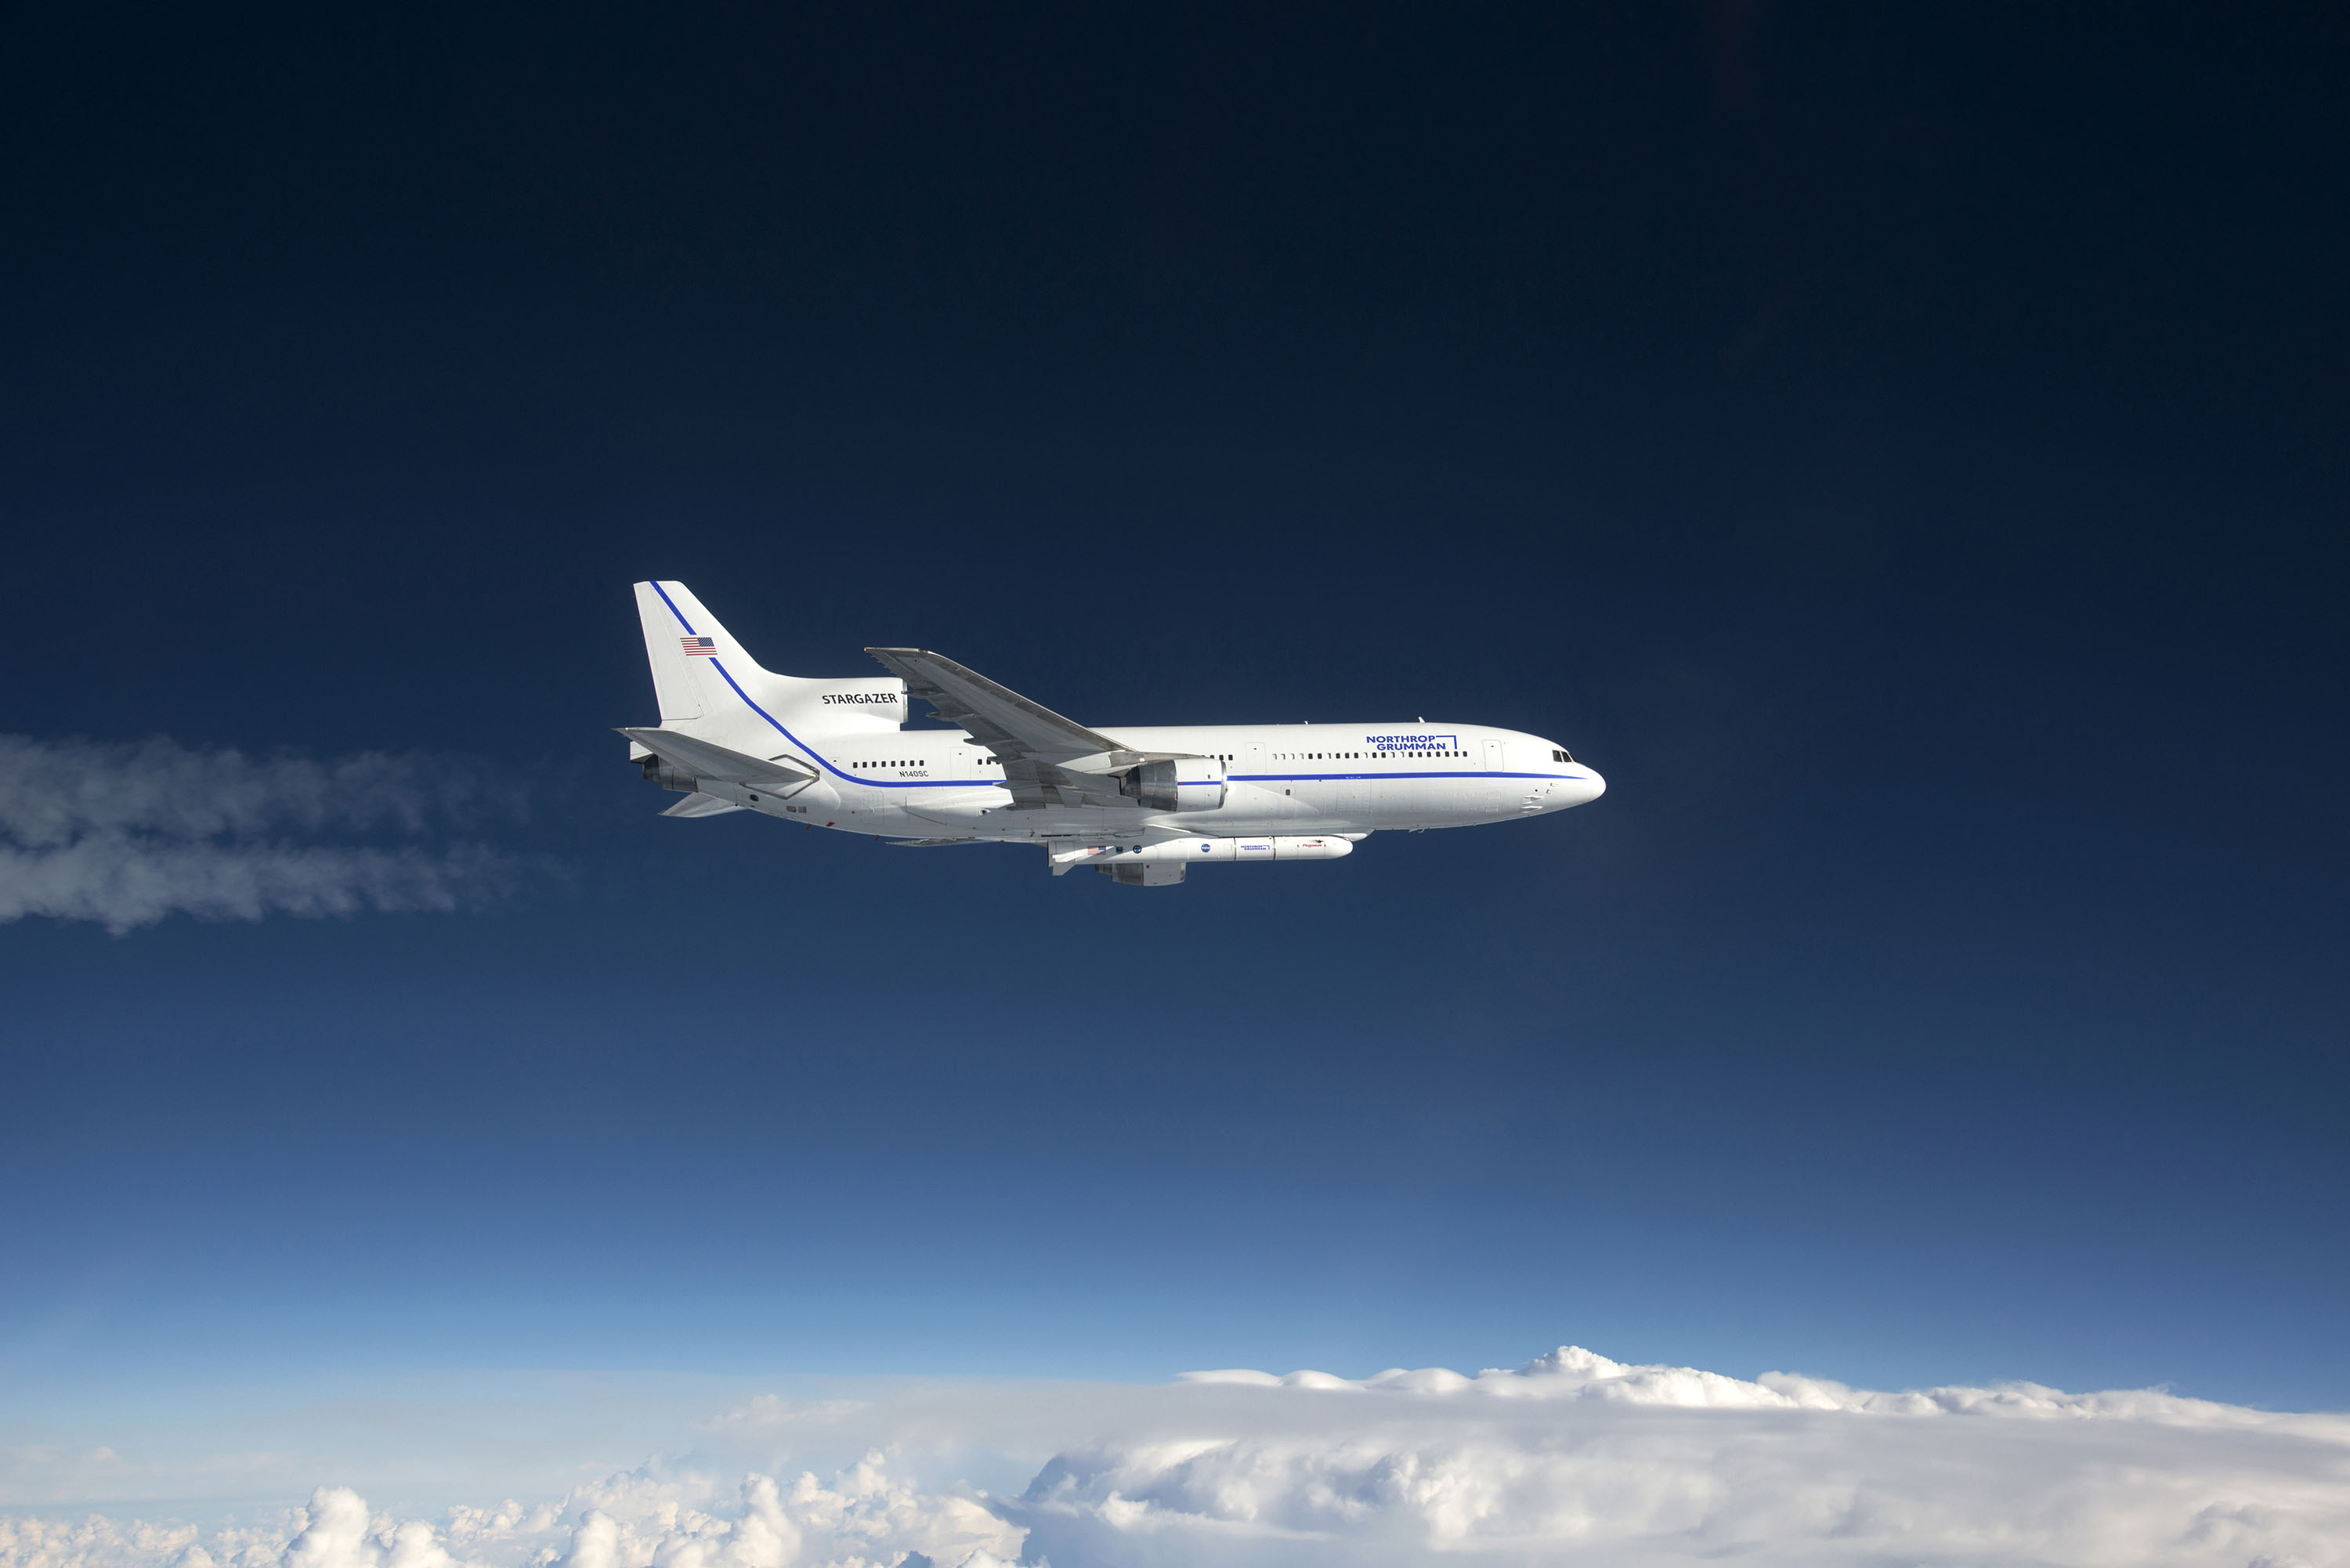 A white airplane above clouds in front of a blue sky